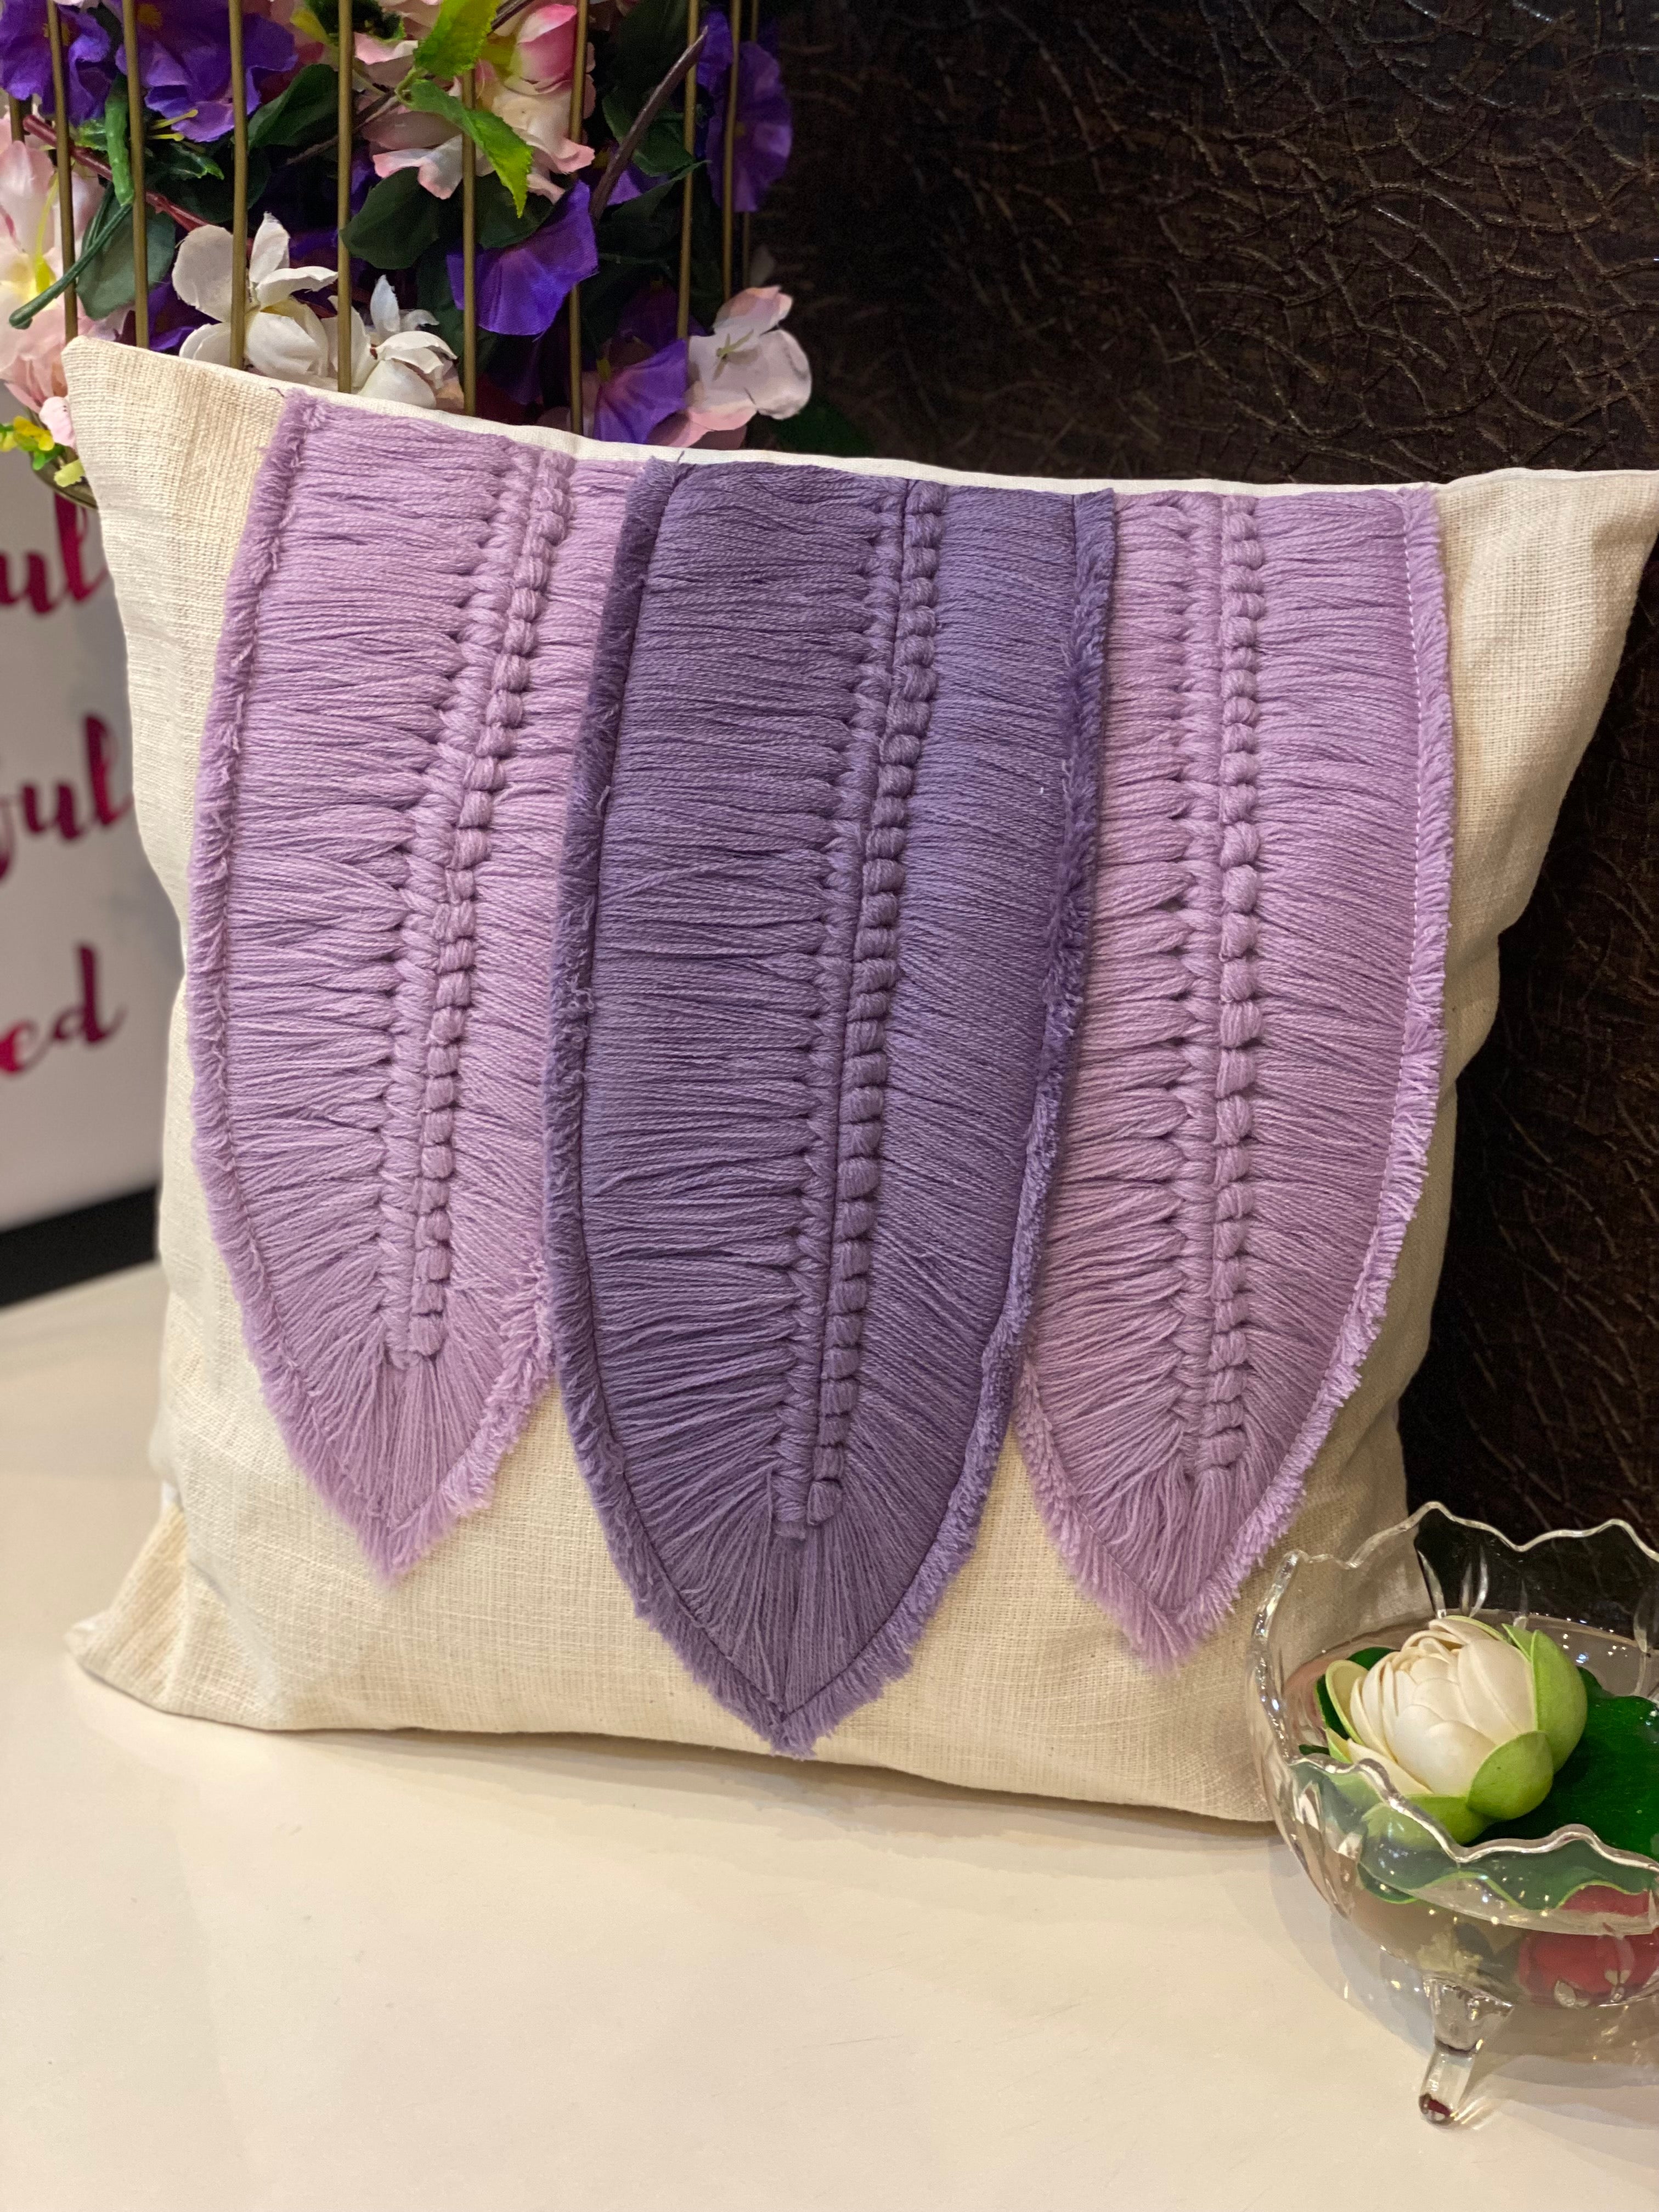 Embellished 3 feathers Cushion Cover- 16*16 inches